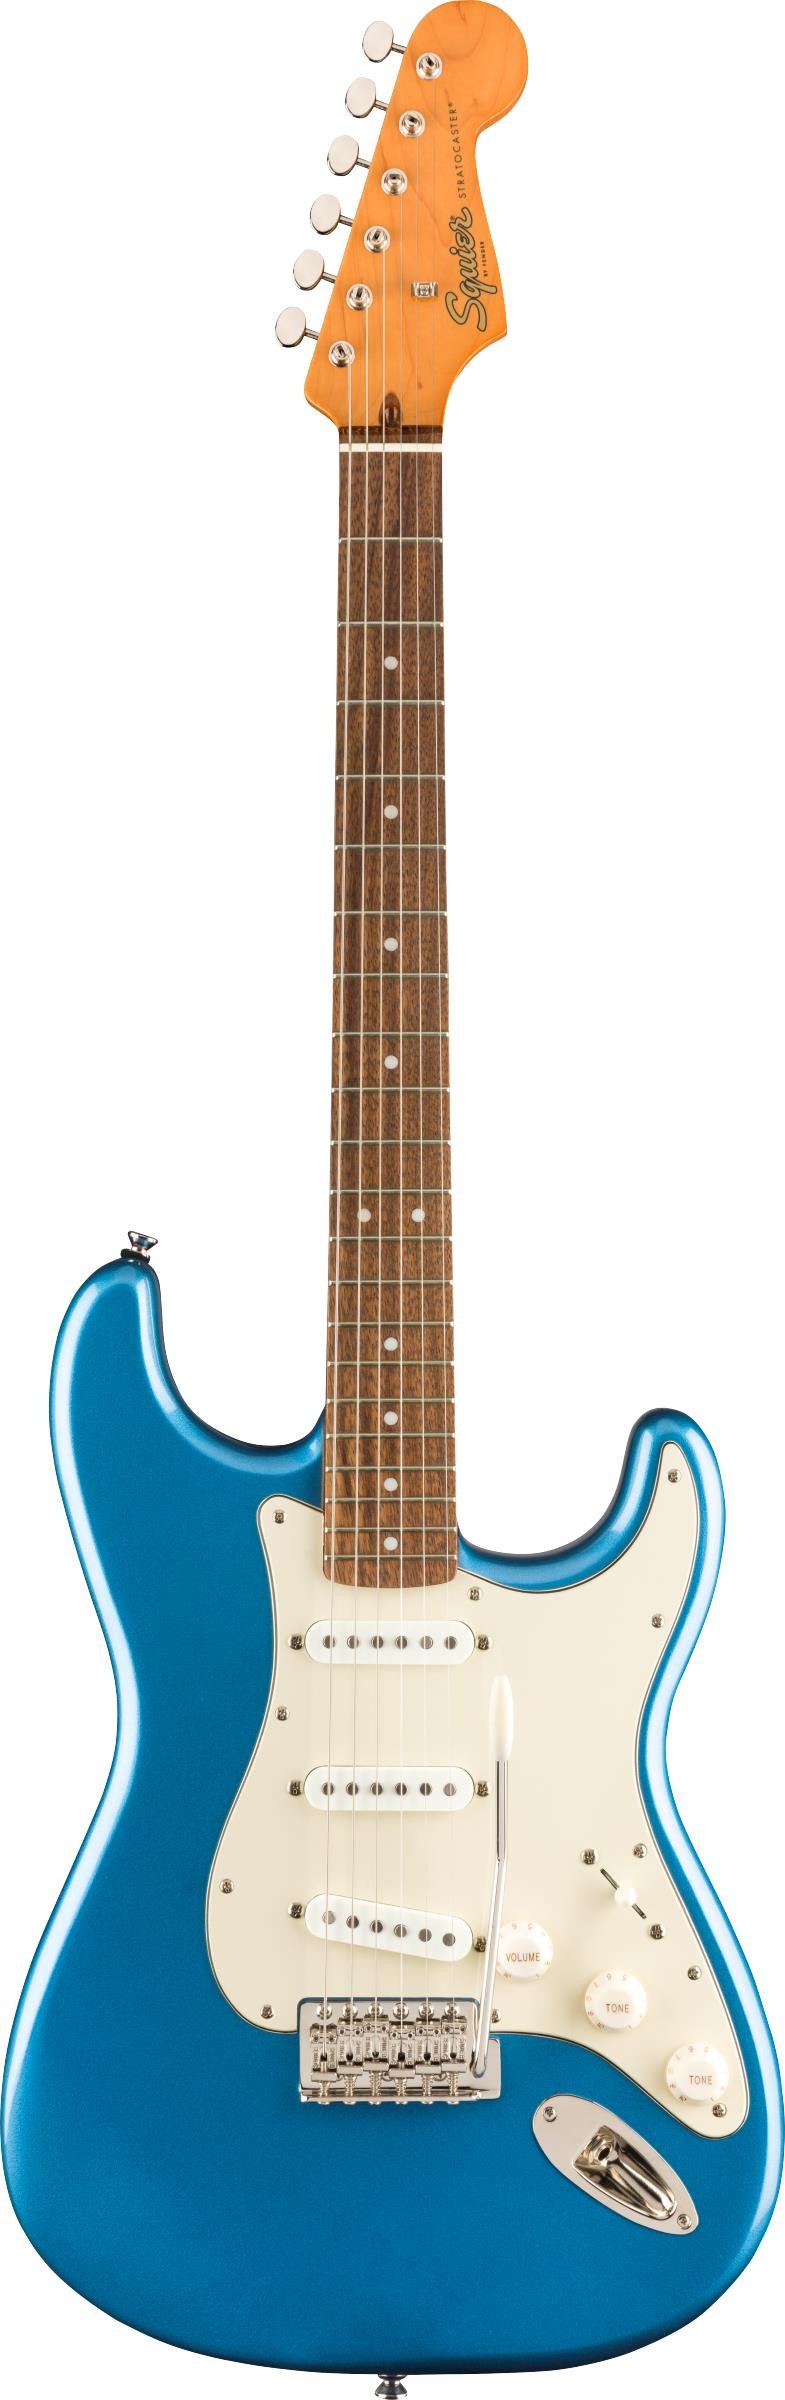 Squier Classic Vibe Stratocaster 60s Lake Placid Blue